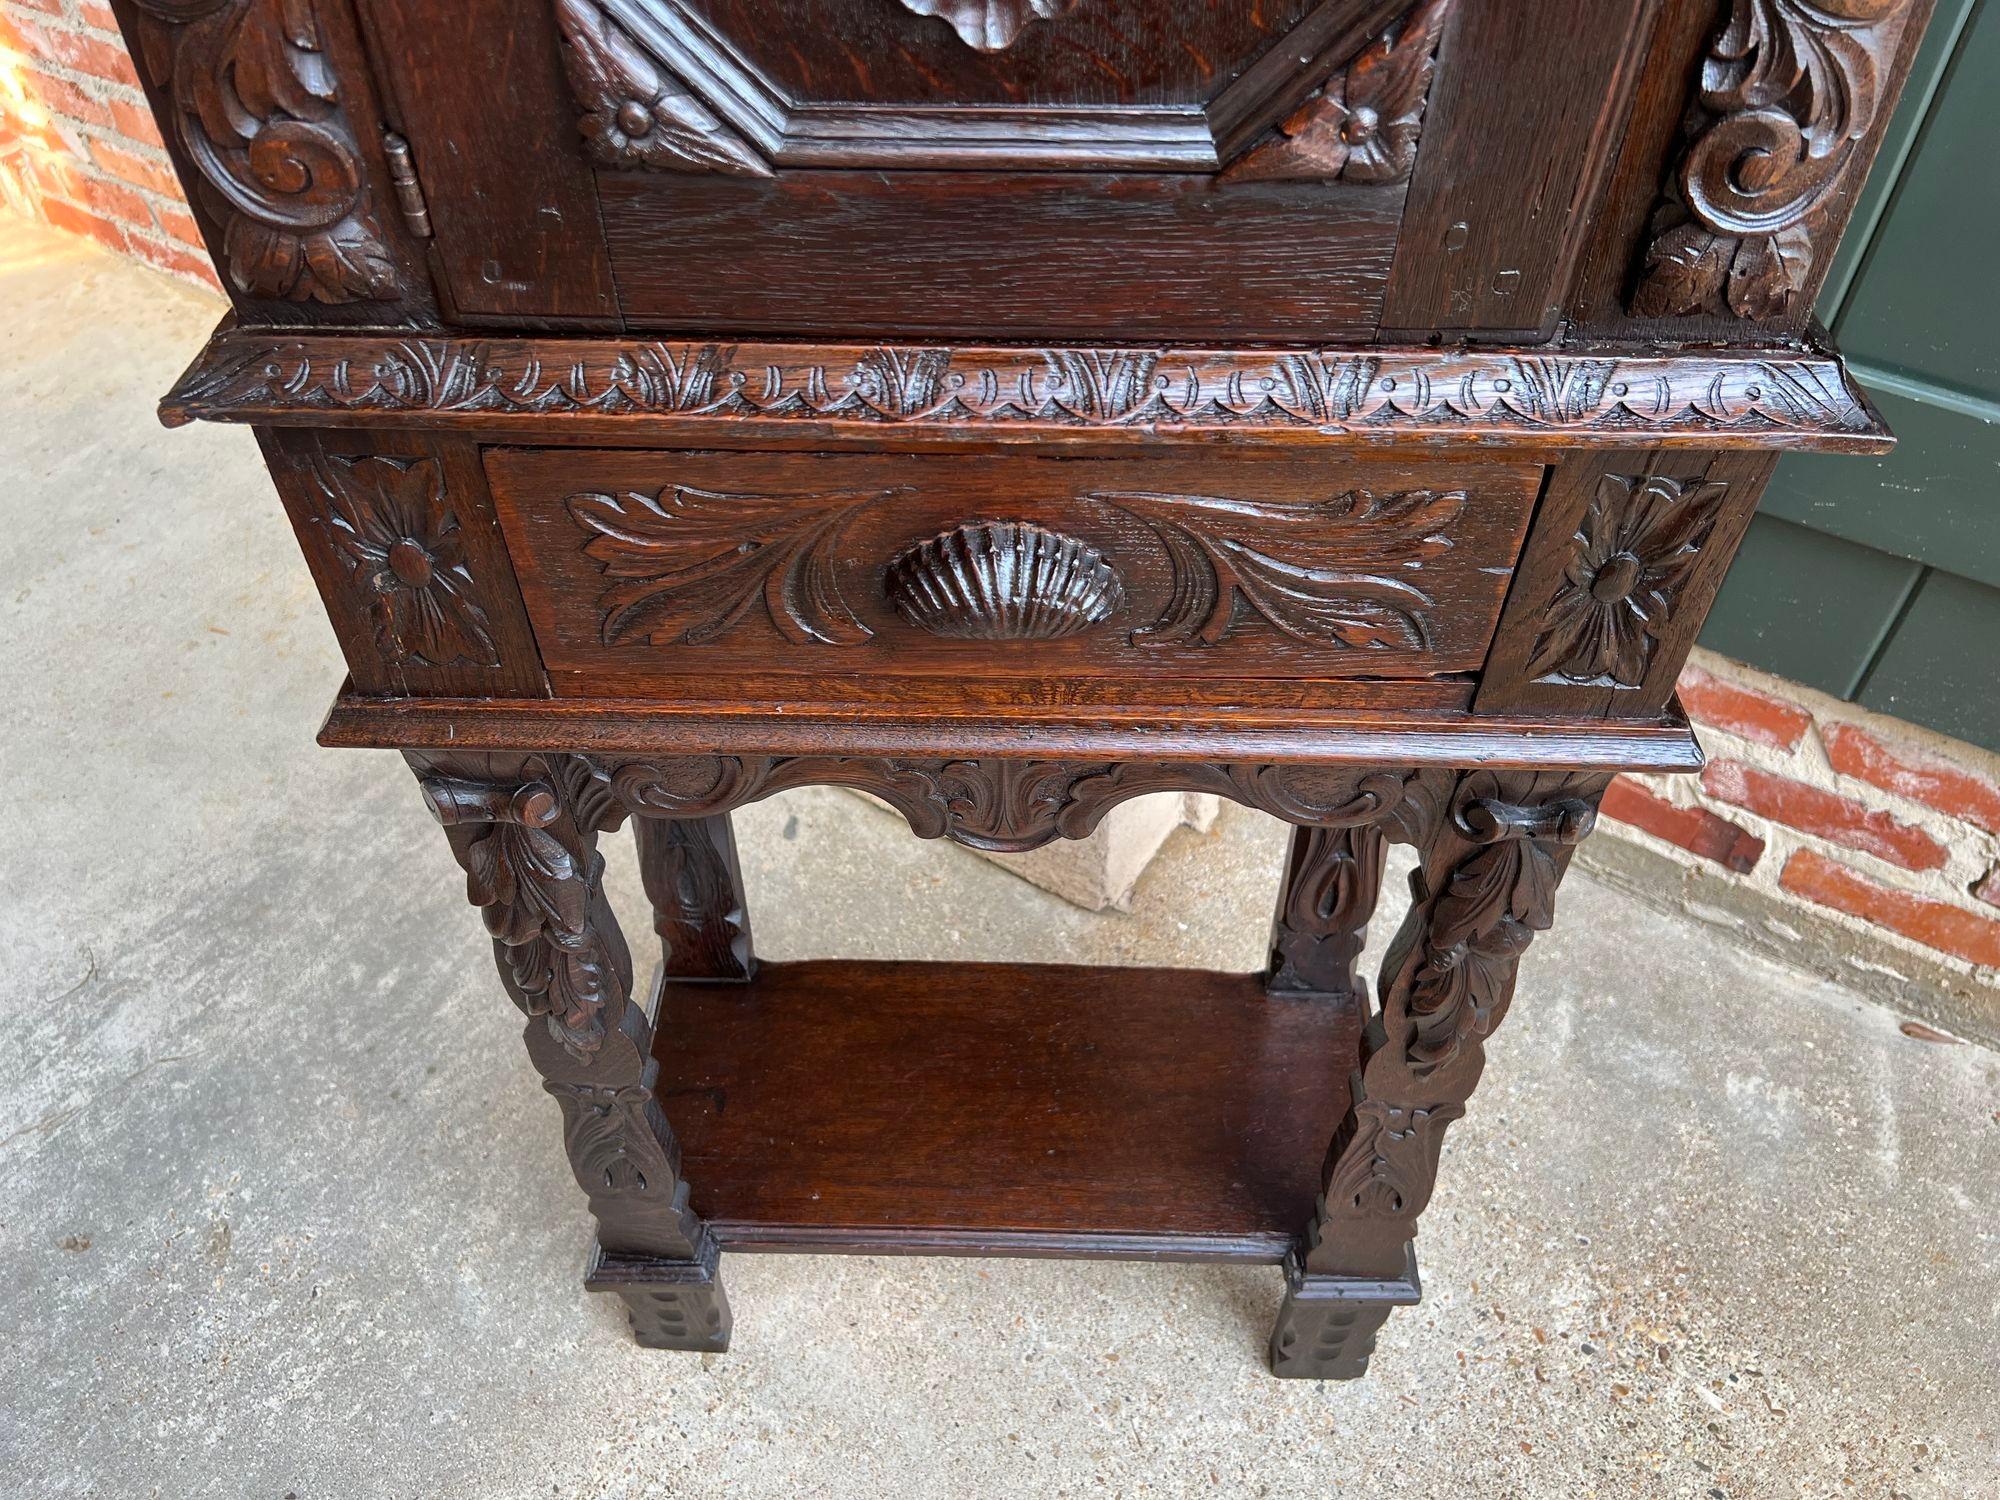 Antique English Cabinet Bookcase Carved Oak Pegged Cupboard c1820 In Good Condition For Sale In Shreveport, LA